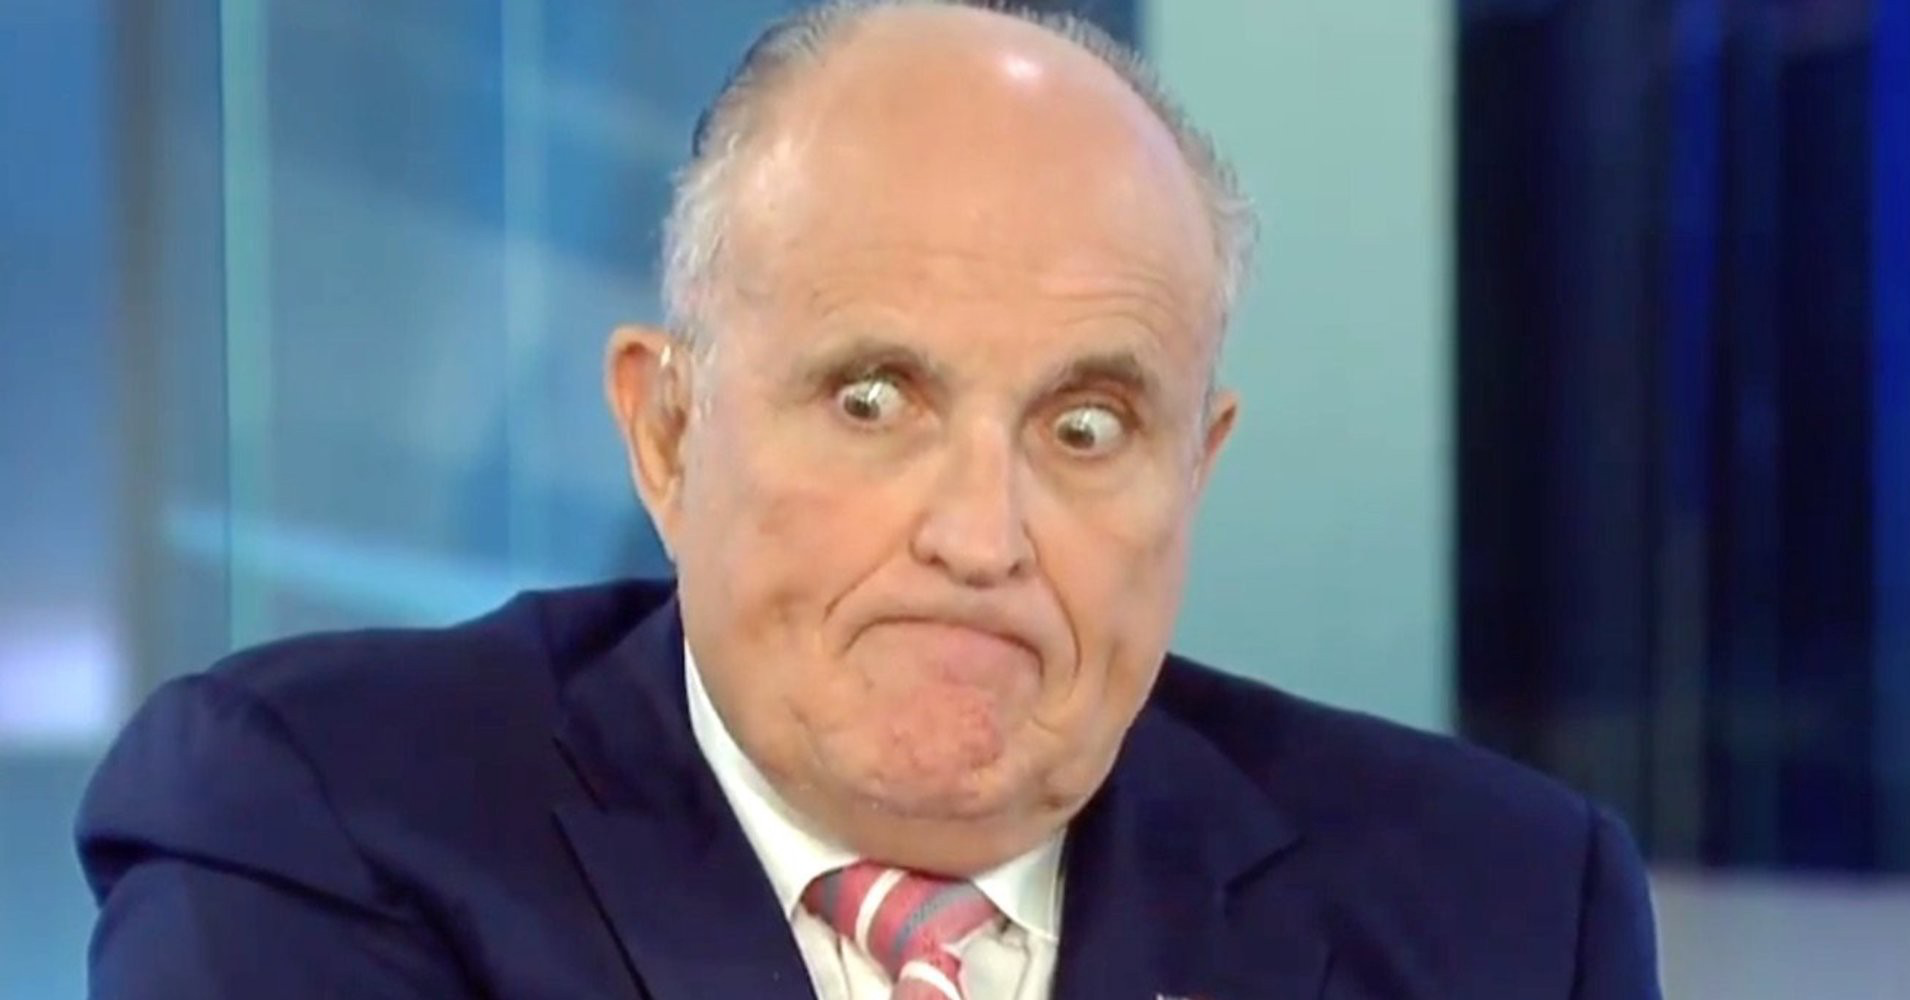 RUDY GIULIANI AND OTHER TRUMP LAWYERS HAVE GONE LOCO